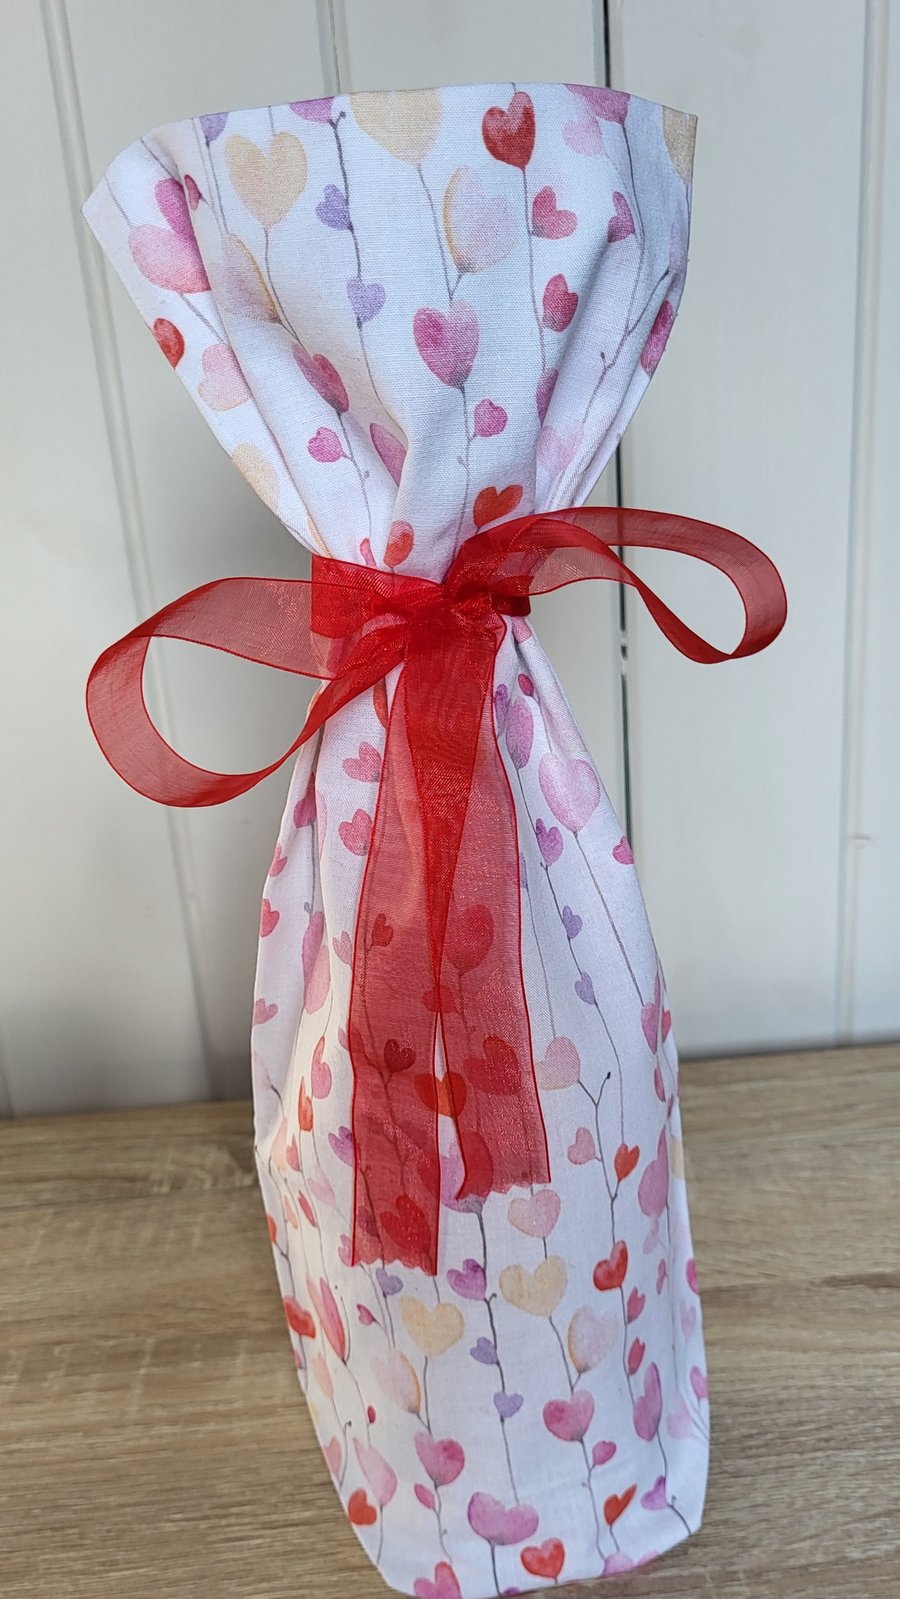 Fabric Bottle Bag in a Trailing Hearts Pattern